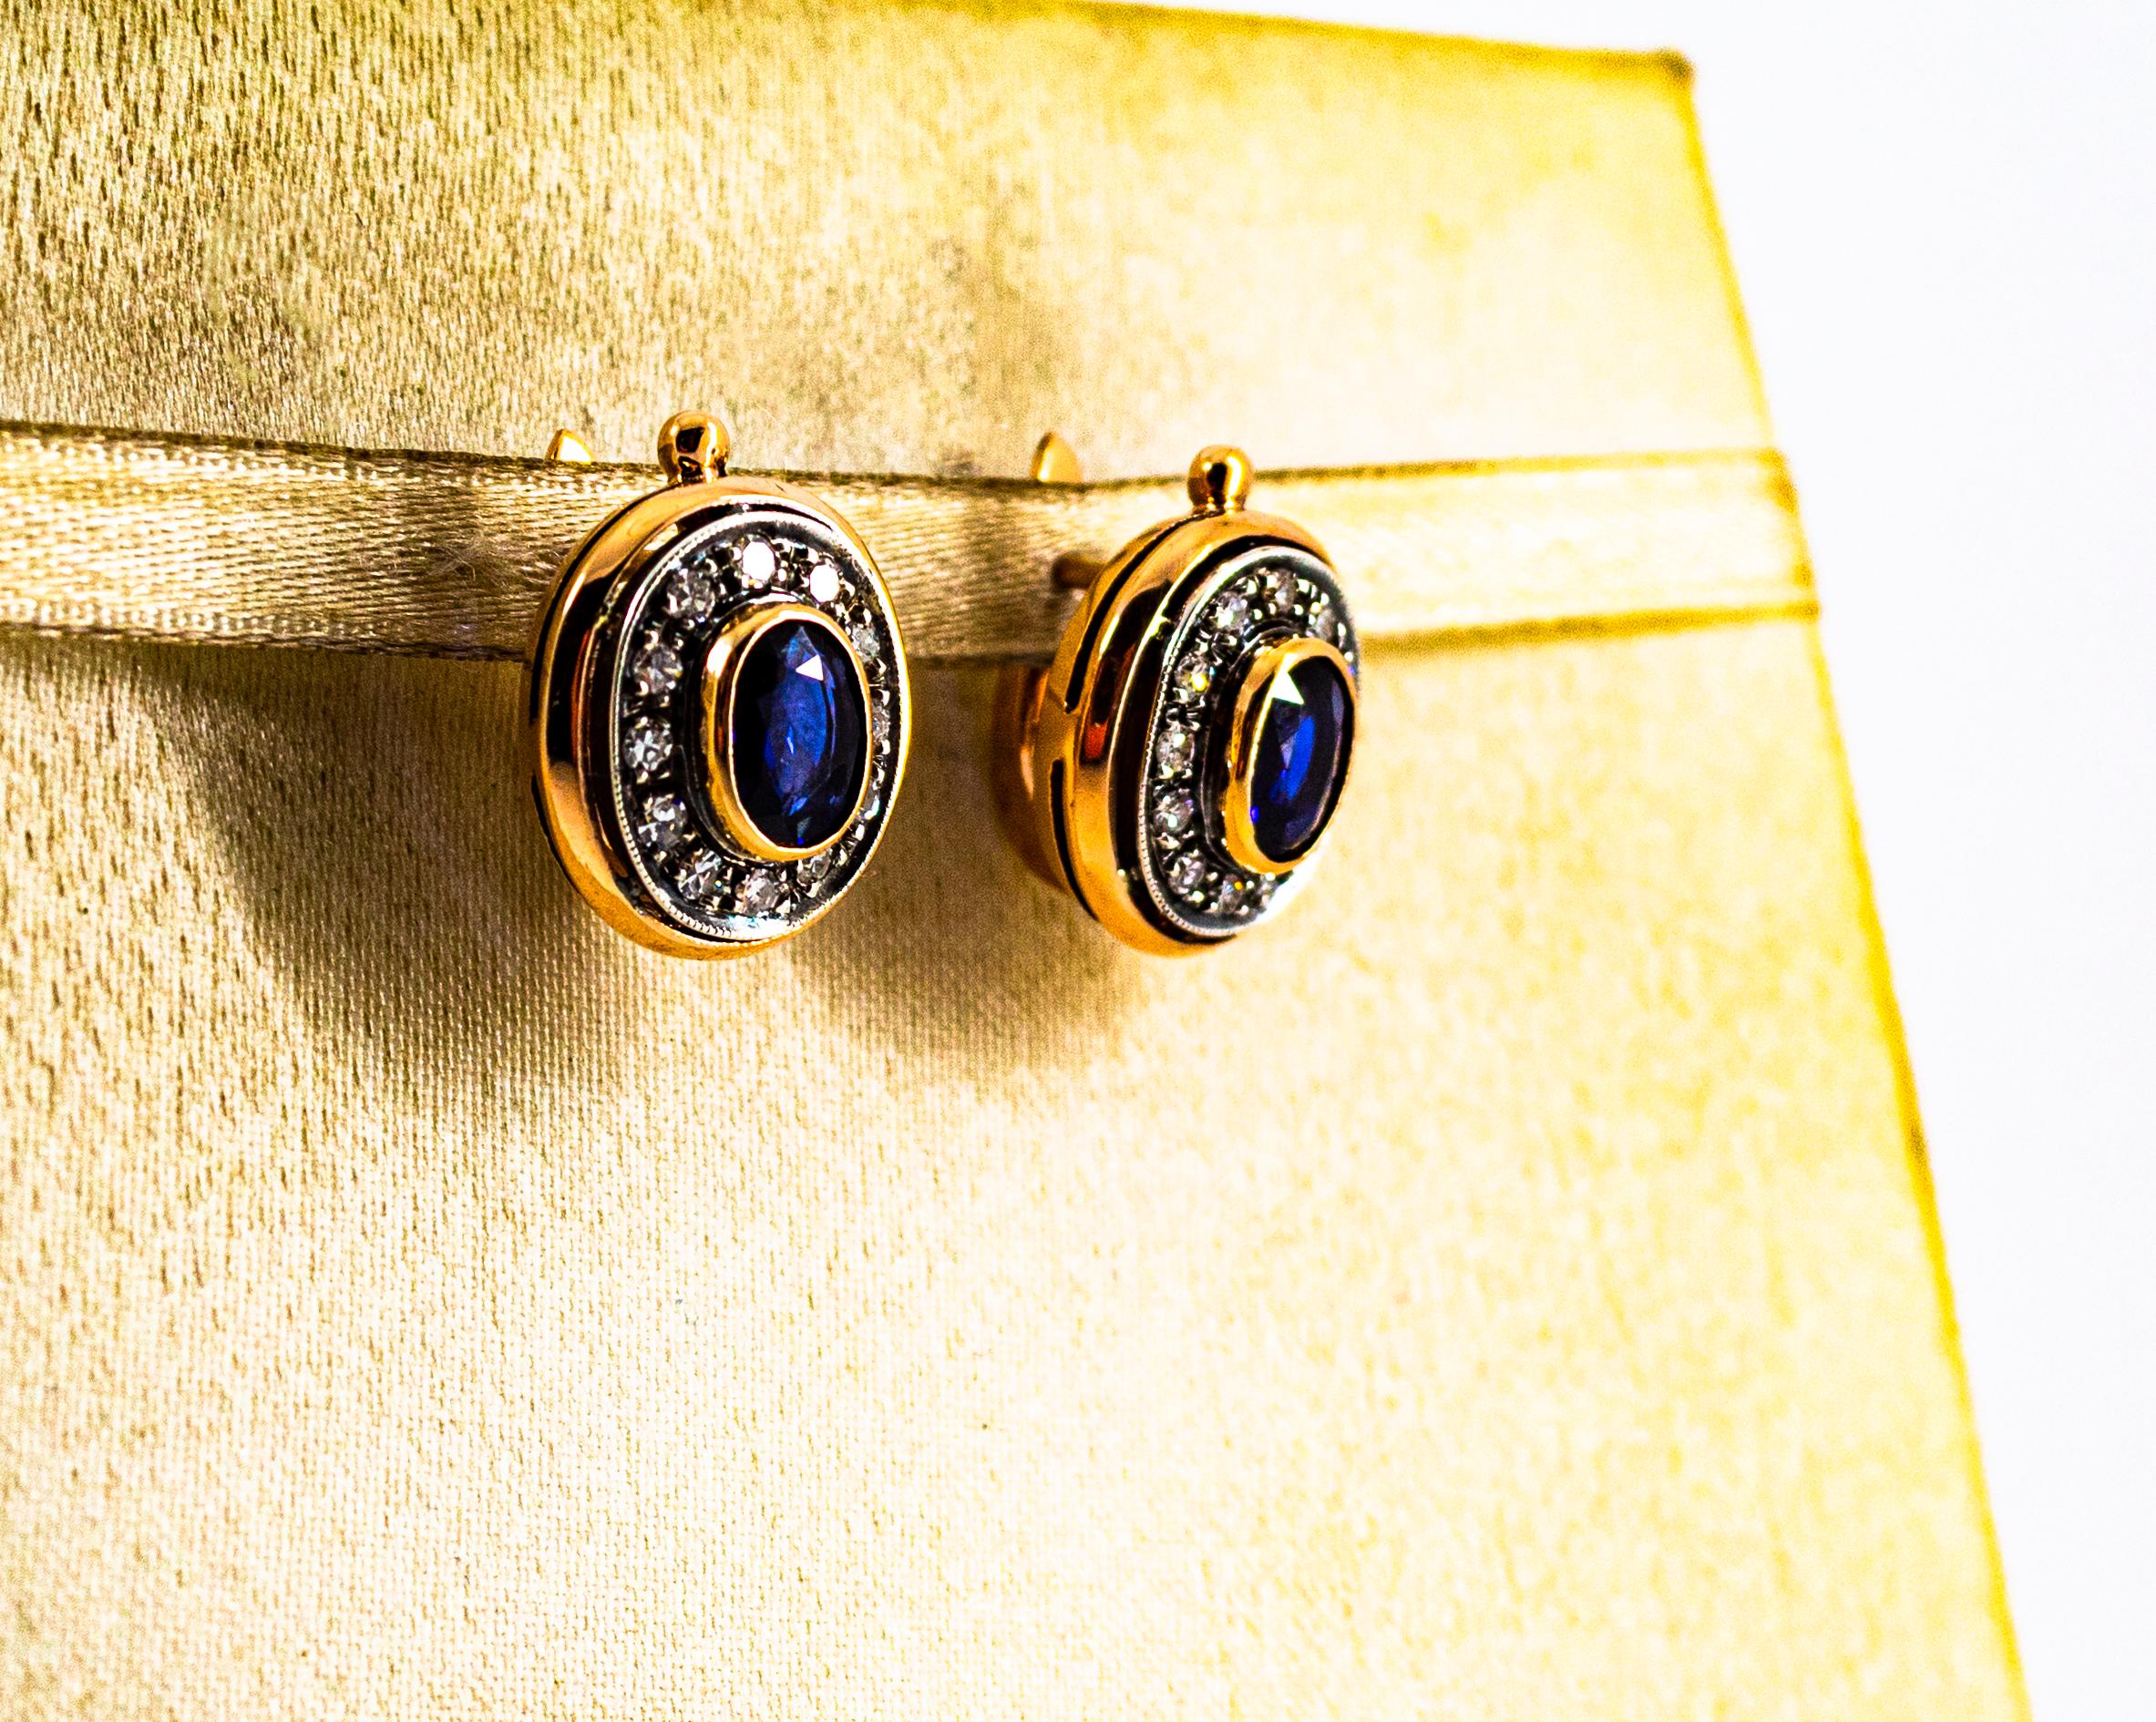 These Lever-Back Earrings are made of 9K Yellow Gold and Sterling Silver.
These Earrings have 0.45 Carats of White Modern Round Cut Diamonds.
These Earrings have 1.62 Carat of Oval Cut Blue Sapphire.

These Earrings have also their matching